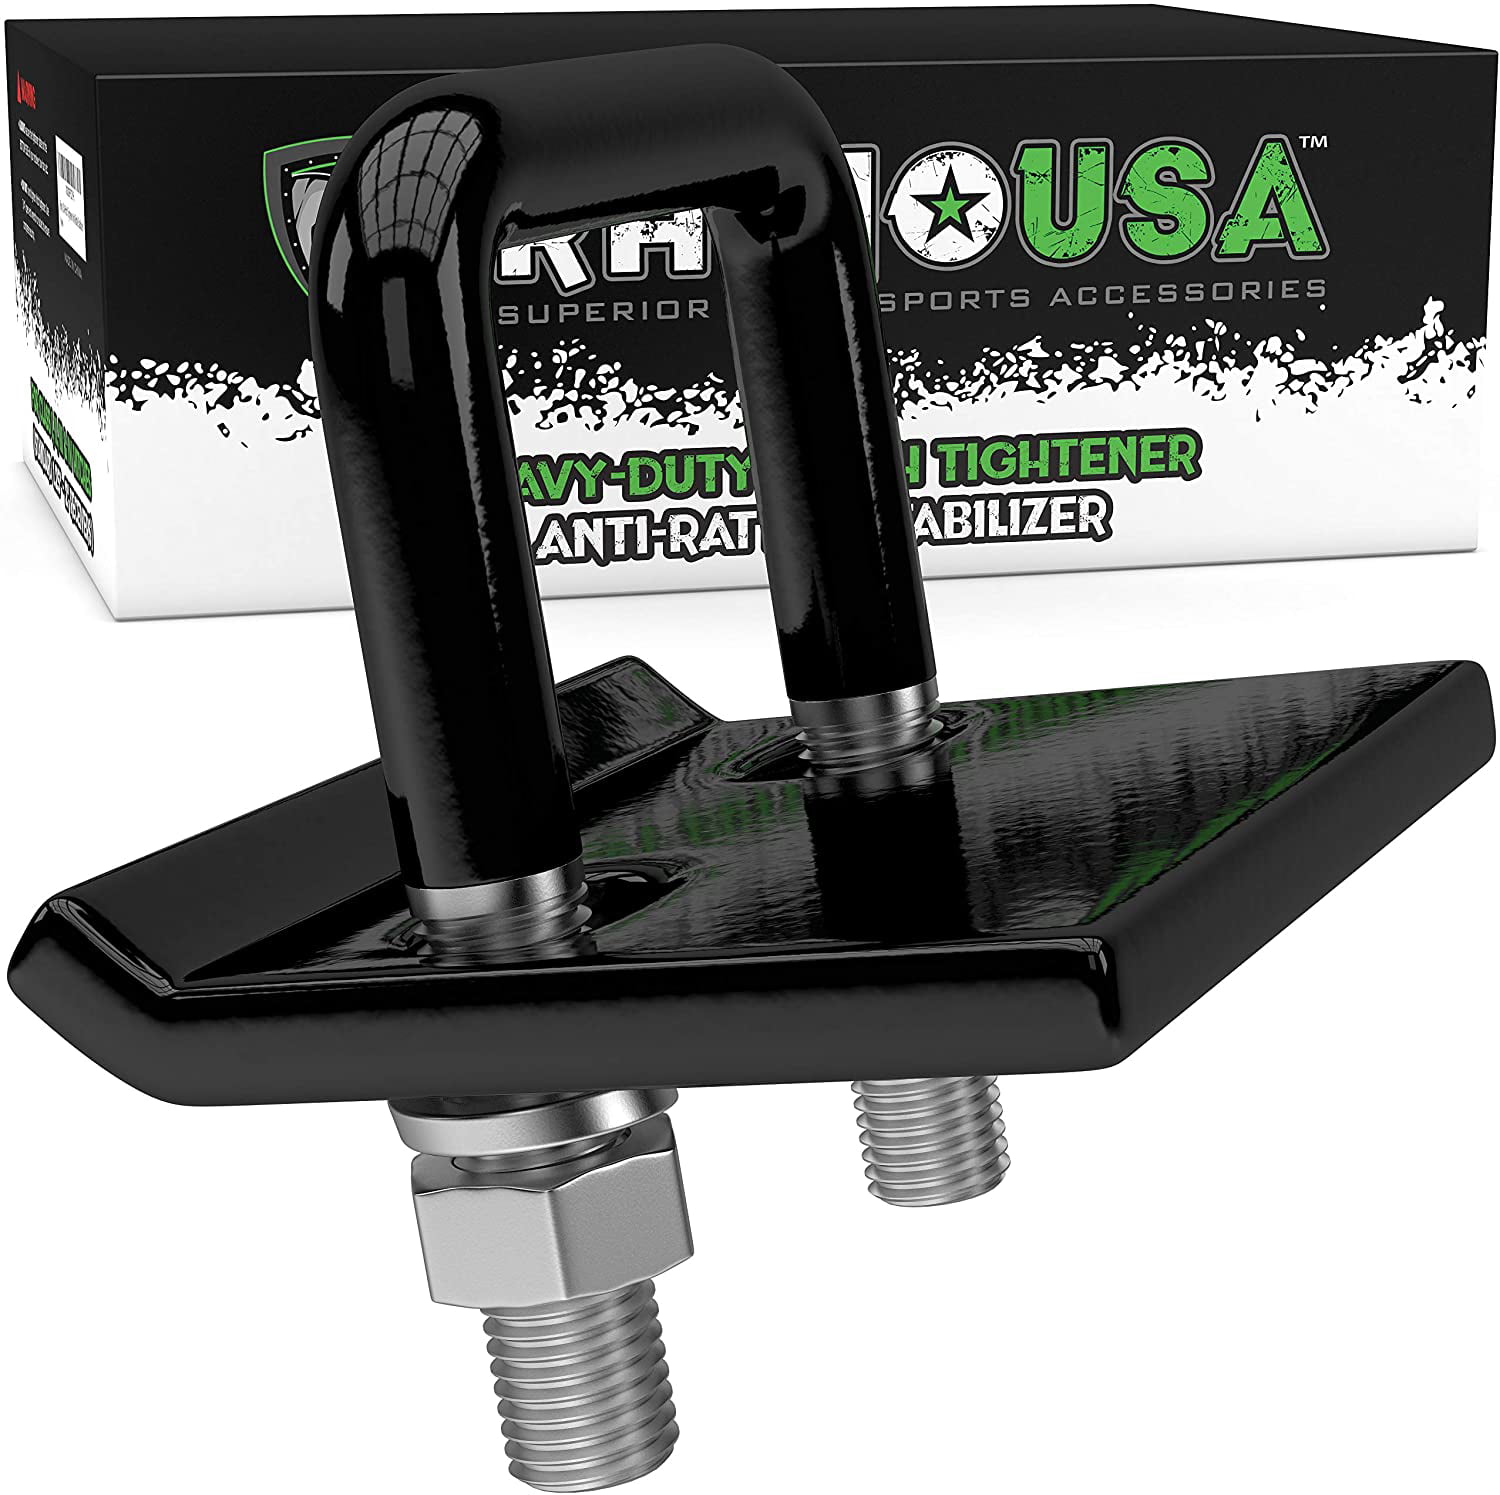 Rhino USA Hitch Tightner Anti Rattle Clamp Heavy Duty Stainless Steel Stabilizer For